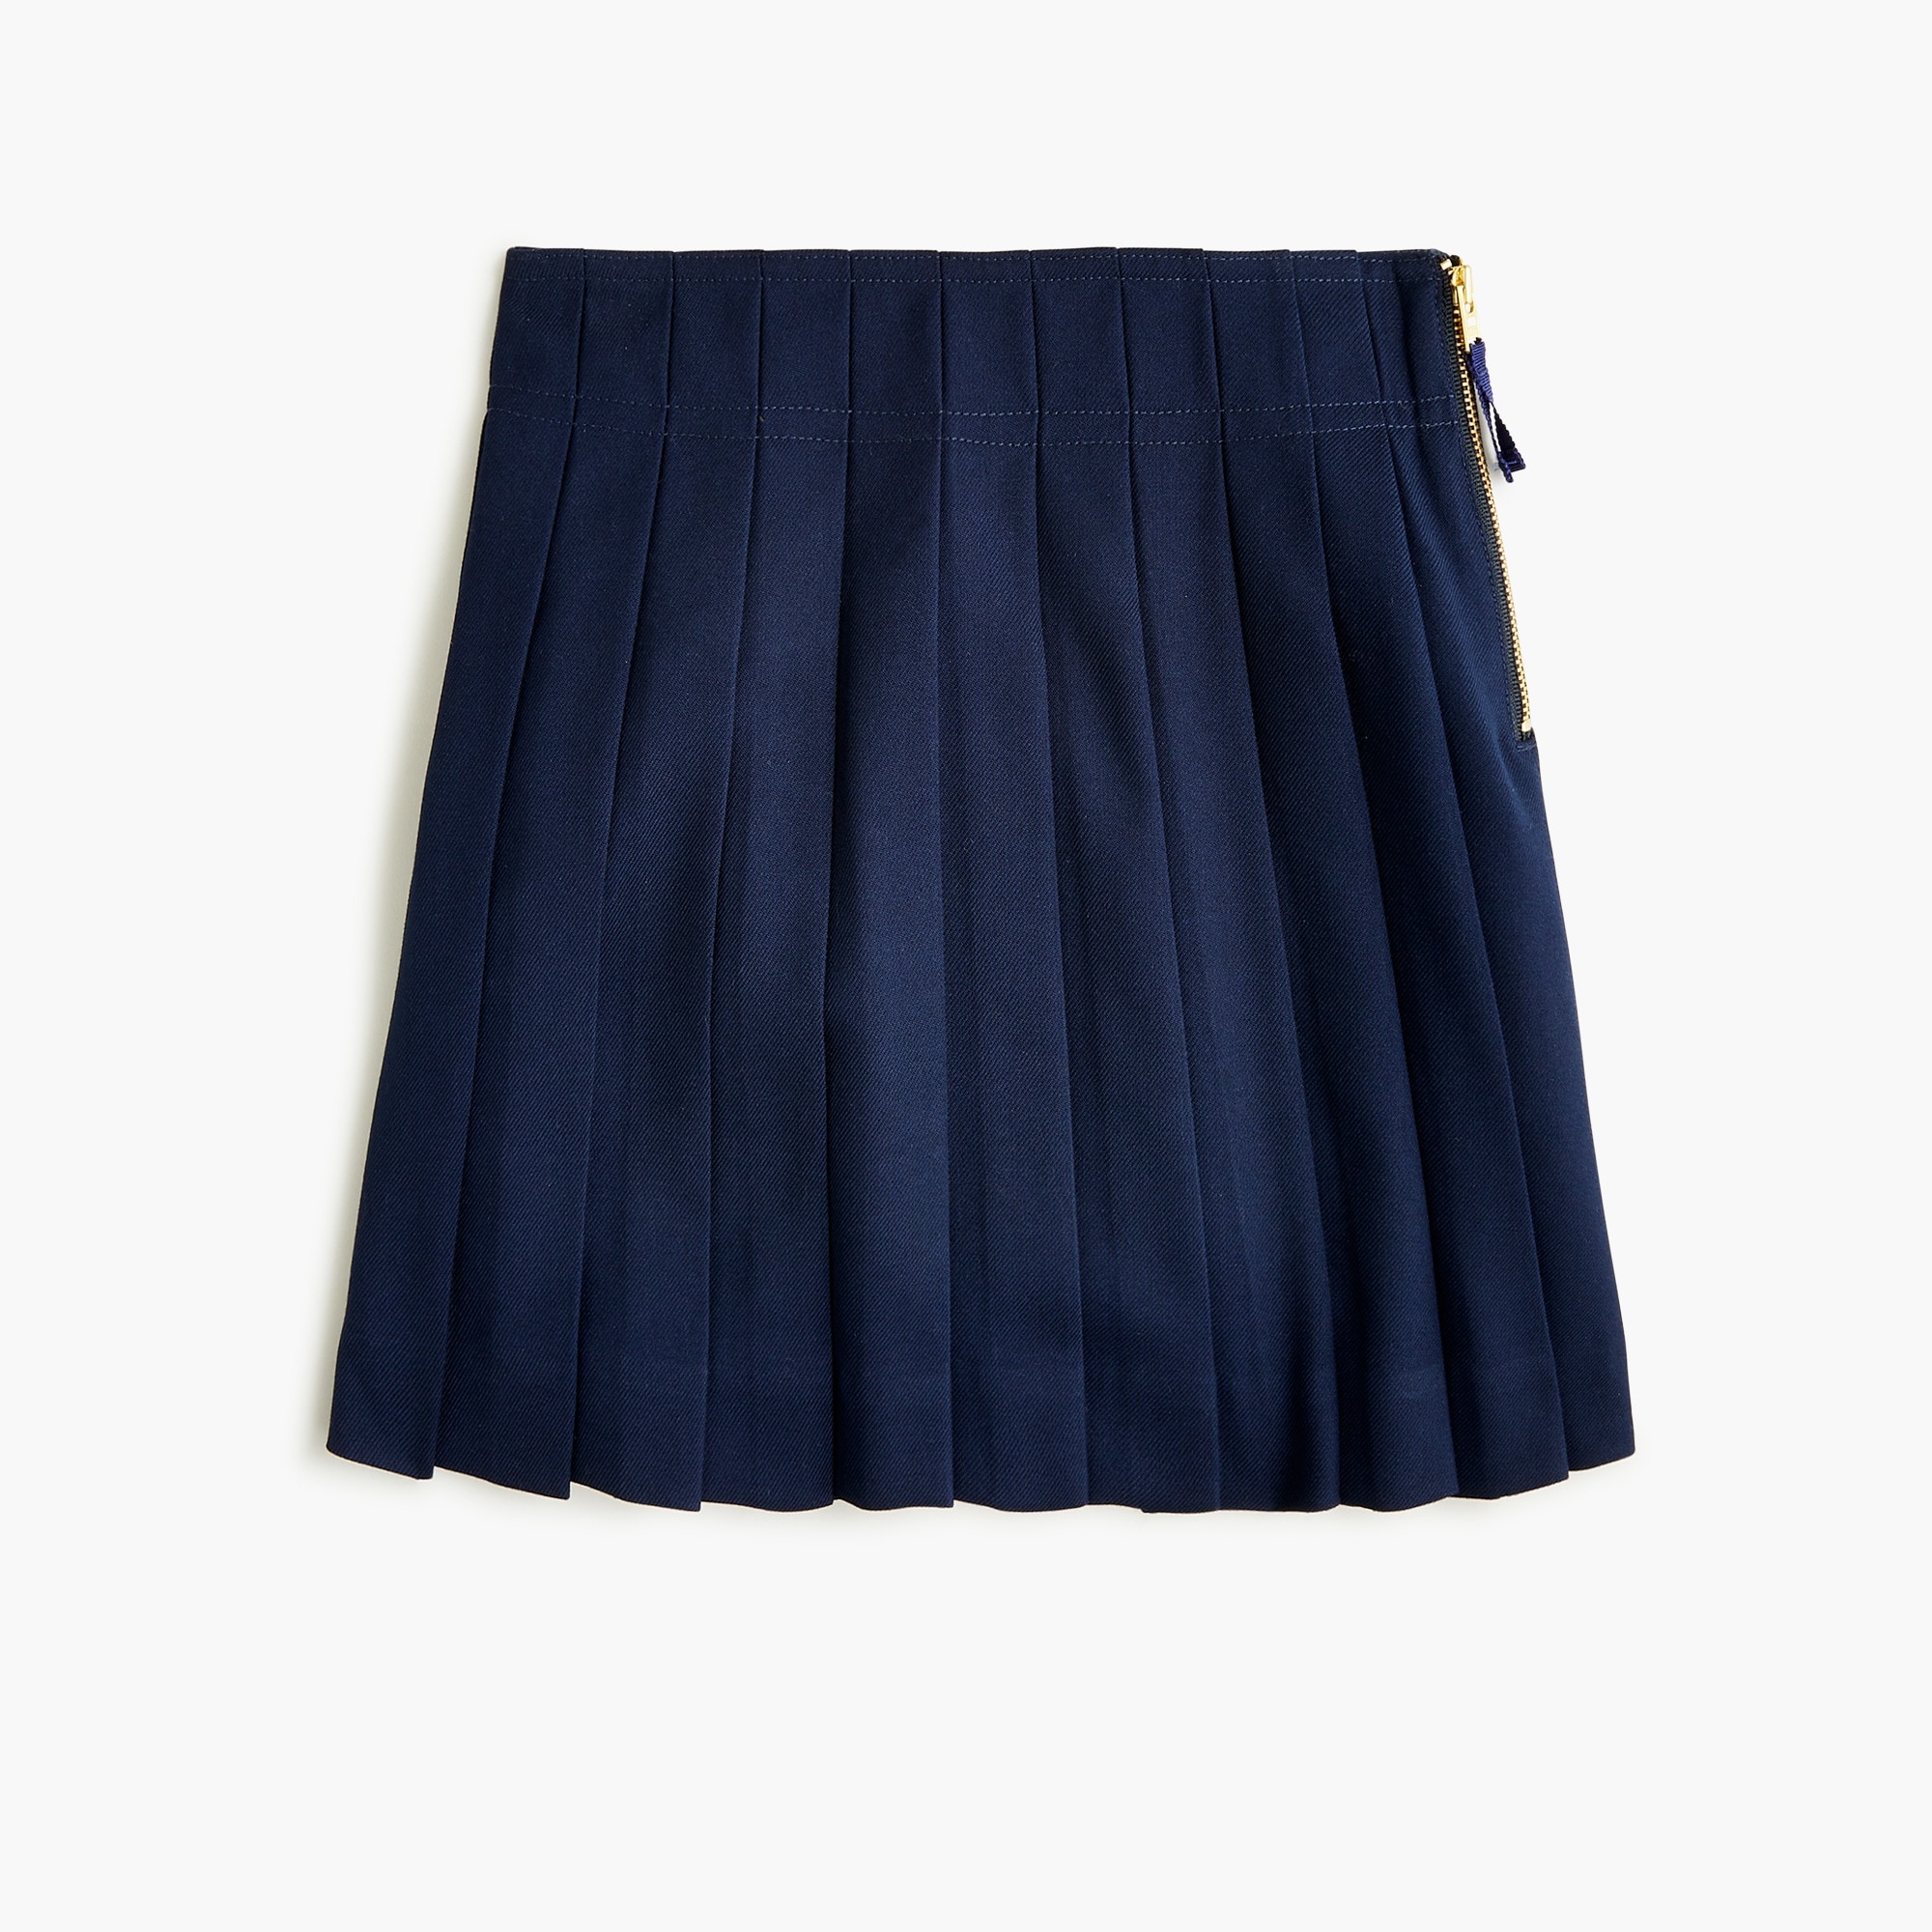  Girls&apos; pleated skirt in twill